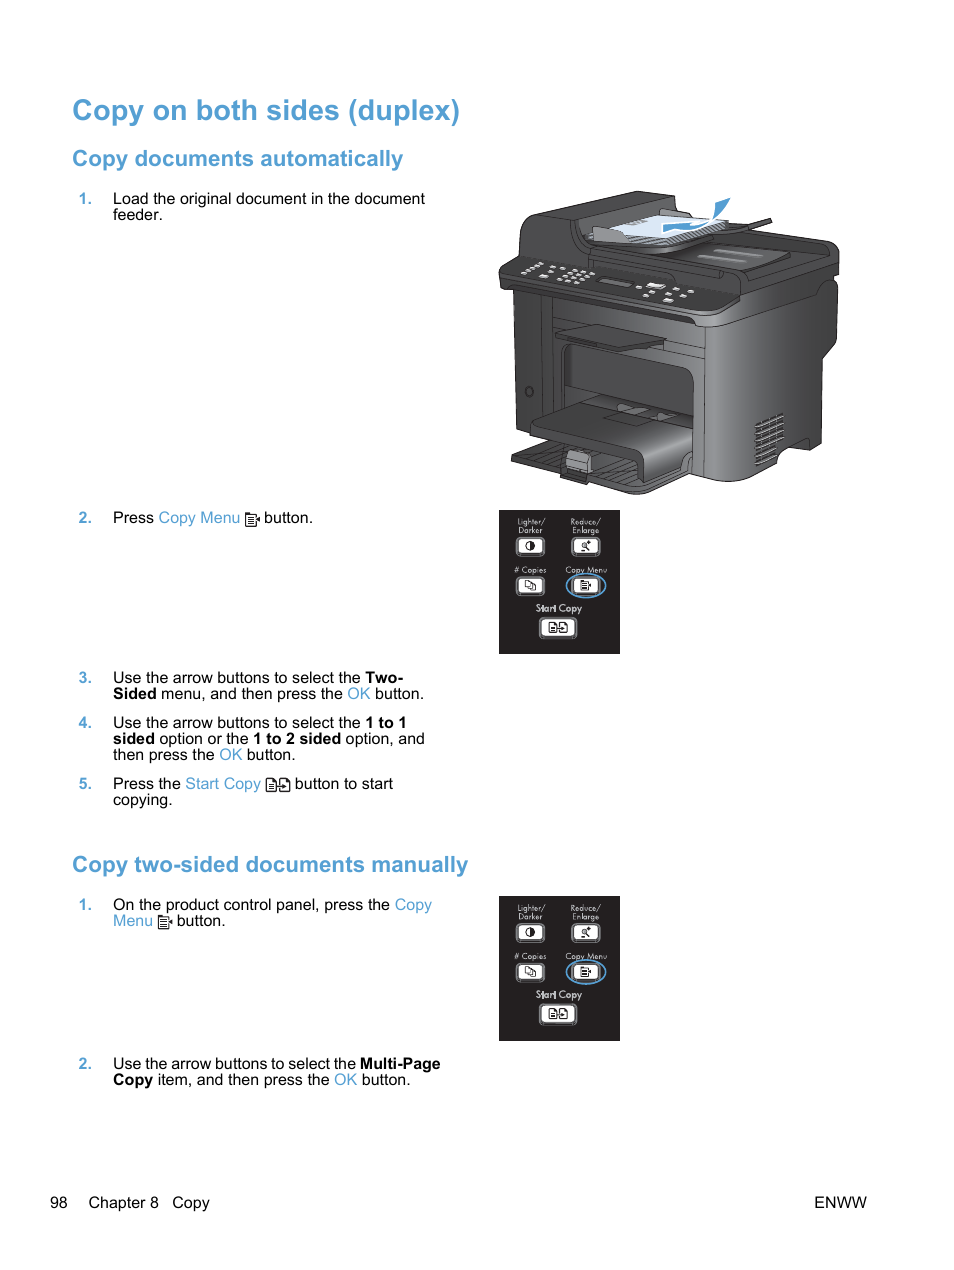 Copy on both sides (duplex), Copy documents automatically, Copy two-sided  documents manually | HP LaserJet Pro M1536dnf MFP SERIES User Manual | Page  112 / 286